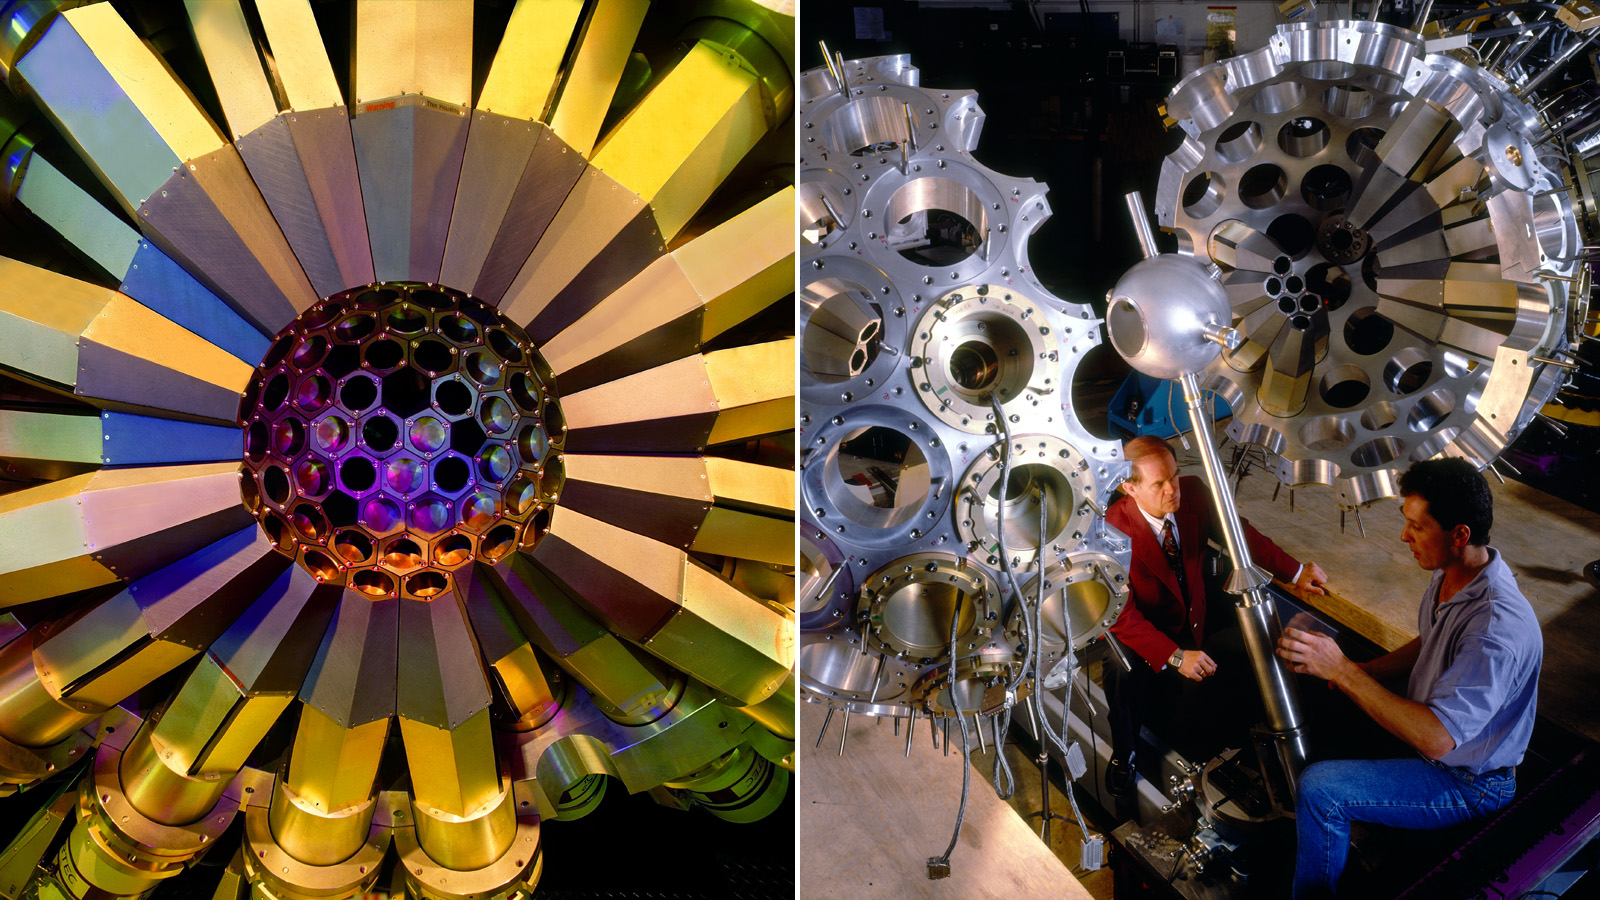 14 Immense Scientific Instruments You Won’t Believe Are Real